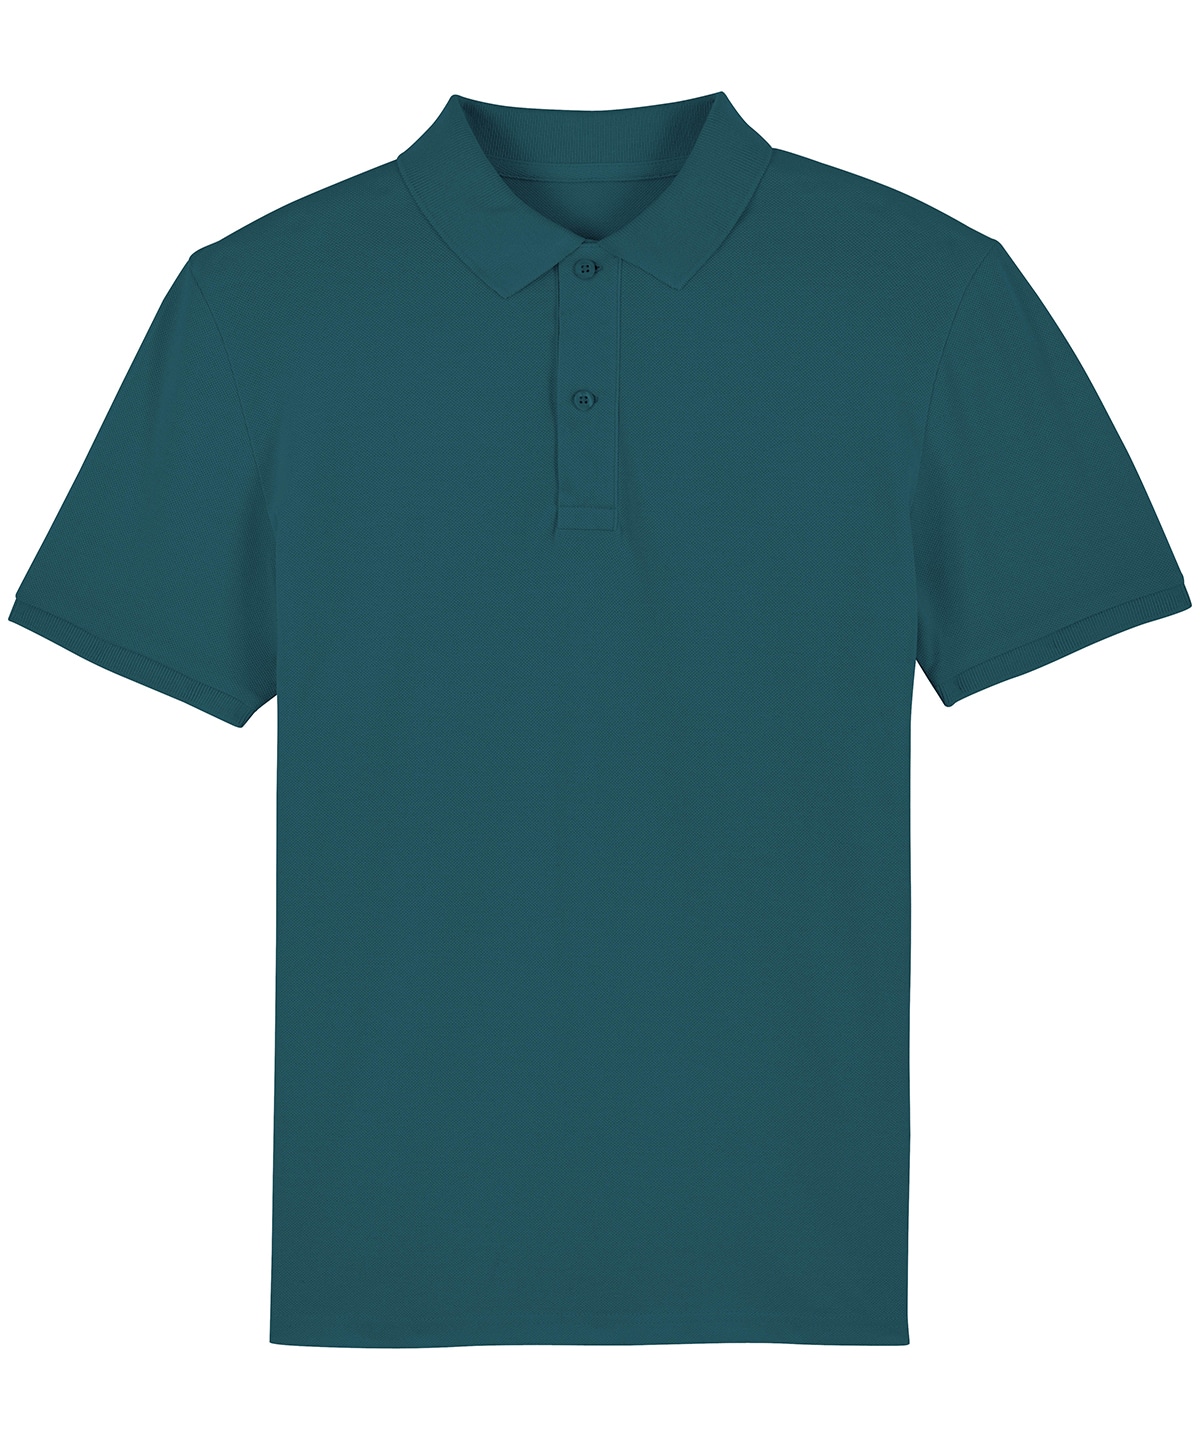 Stanley Stella Prepster Polo - Unisex Fit